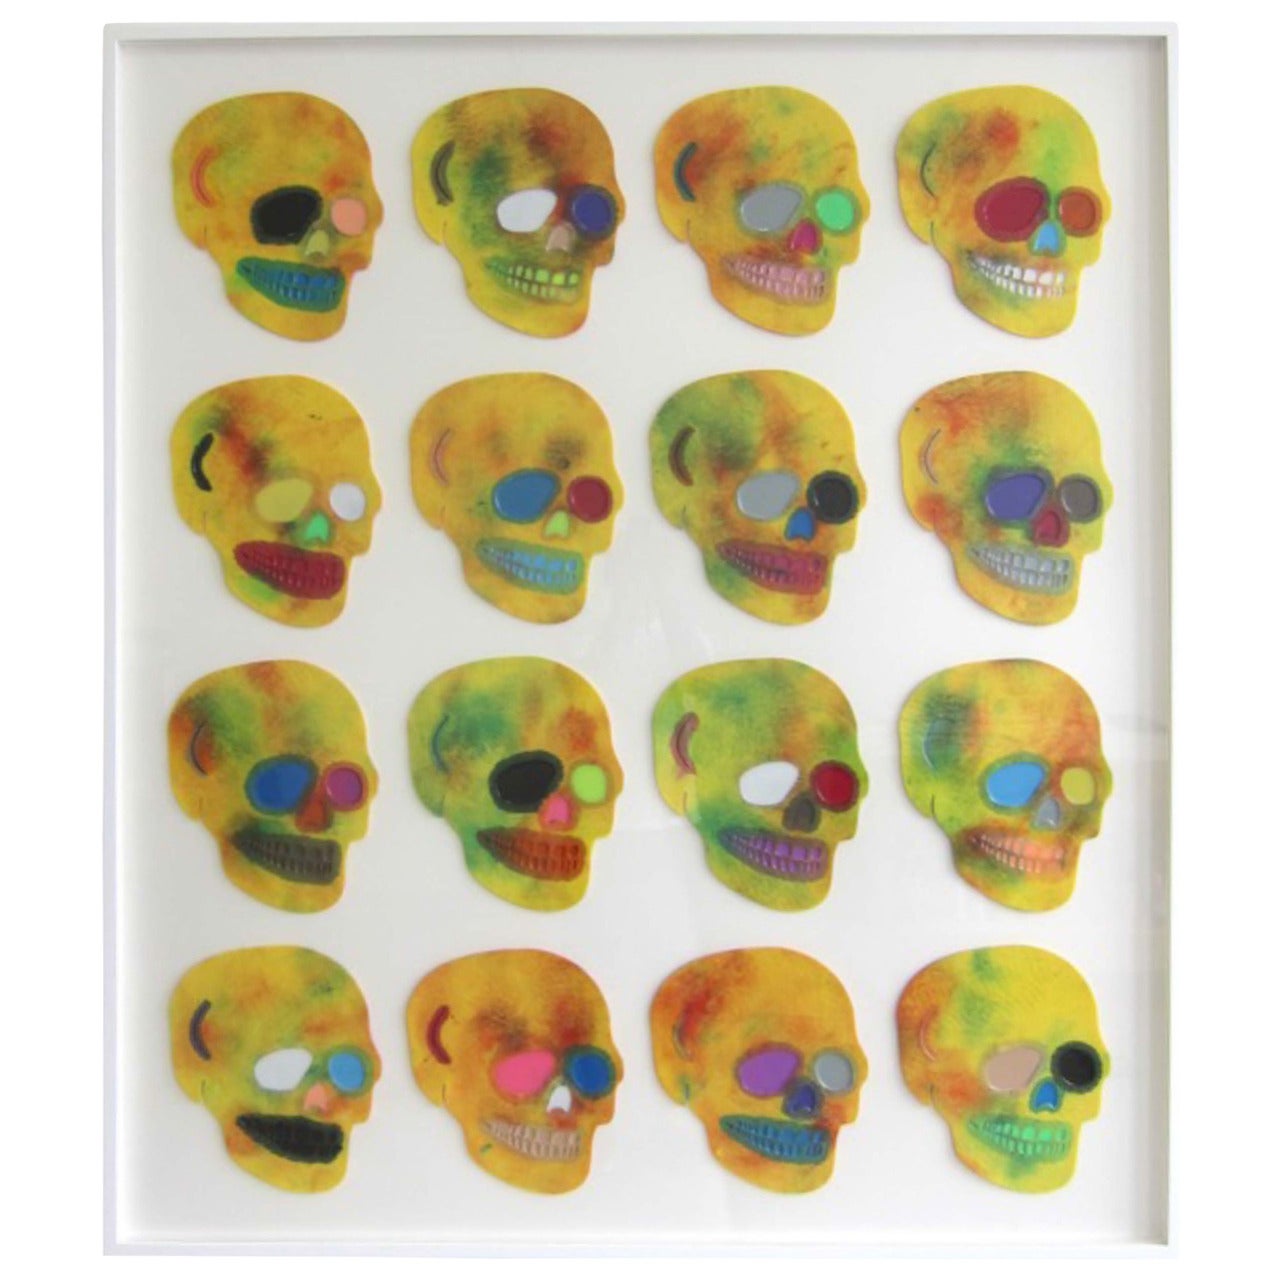 Contemporary American "Tie Die" Multi-Media Work by Ray Geary